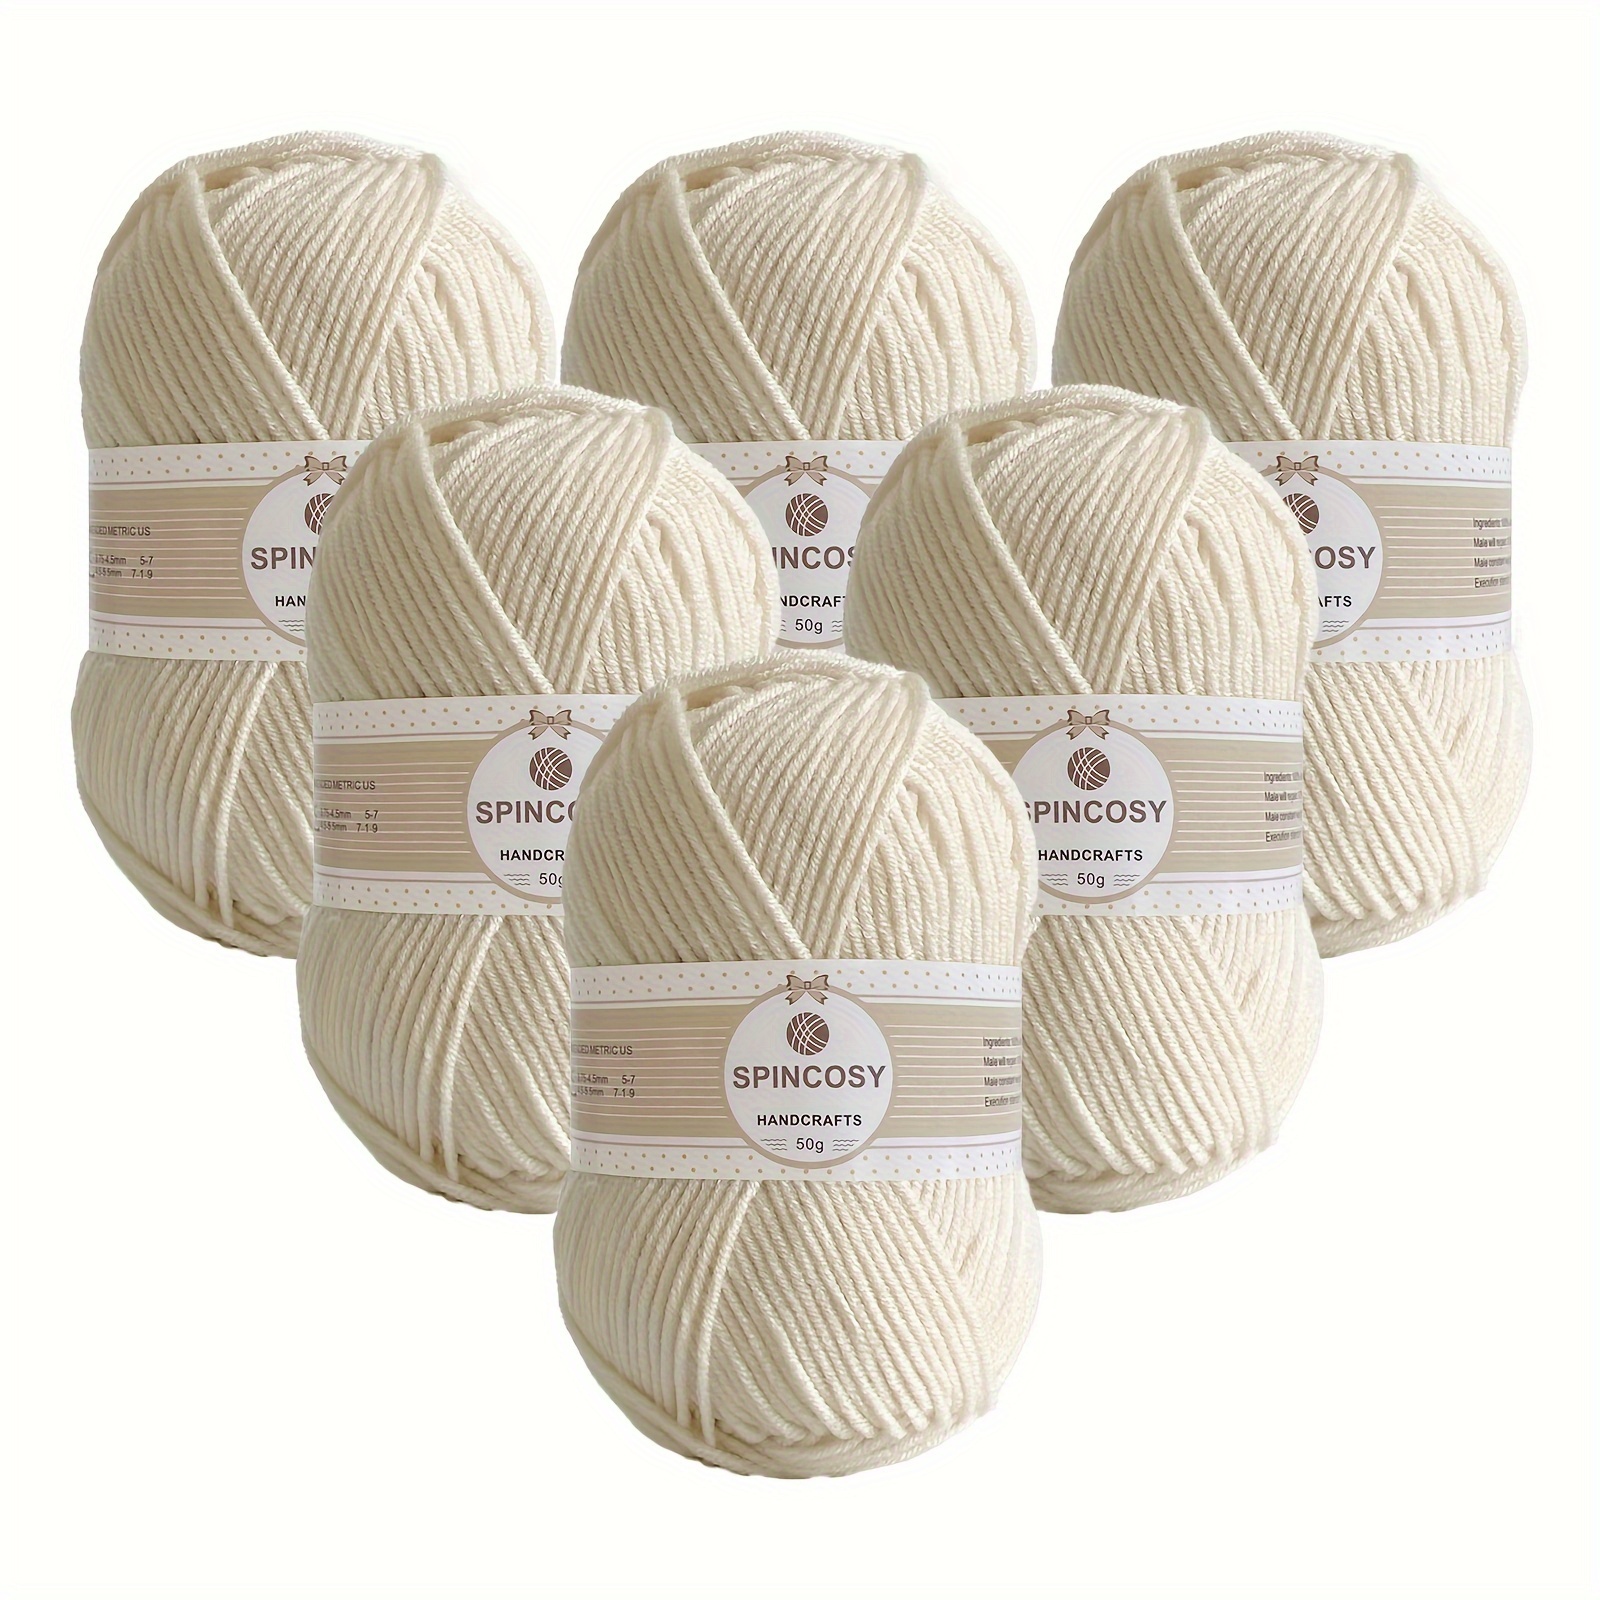 

6pcs 4 Layers Hand-woven Crochet Yarn, Soft And Comfortable, 100% Acrylic Yarn, Suitable For Diy Crocheting And Knitting Scarf, Sweater, Shawl, Blanket, 50g/pc